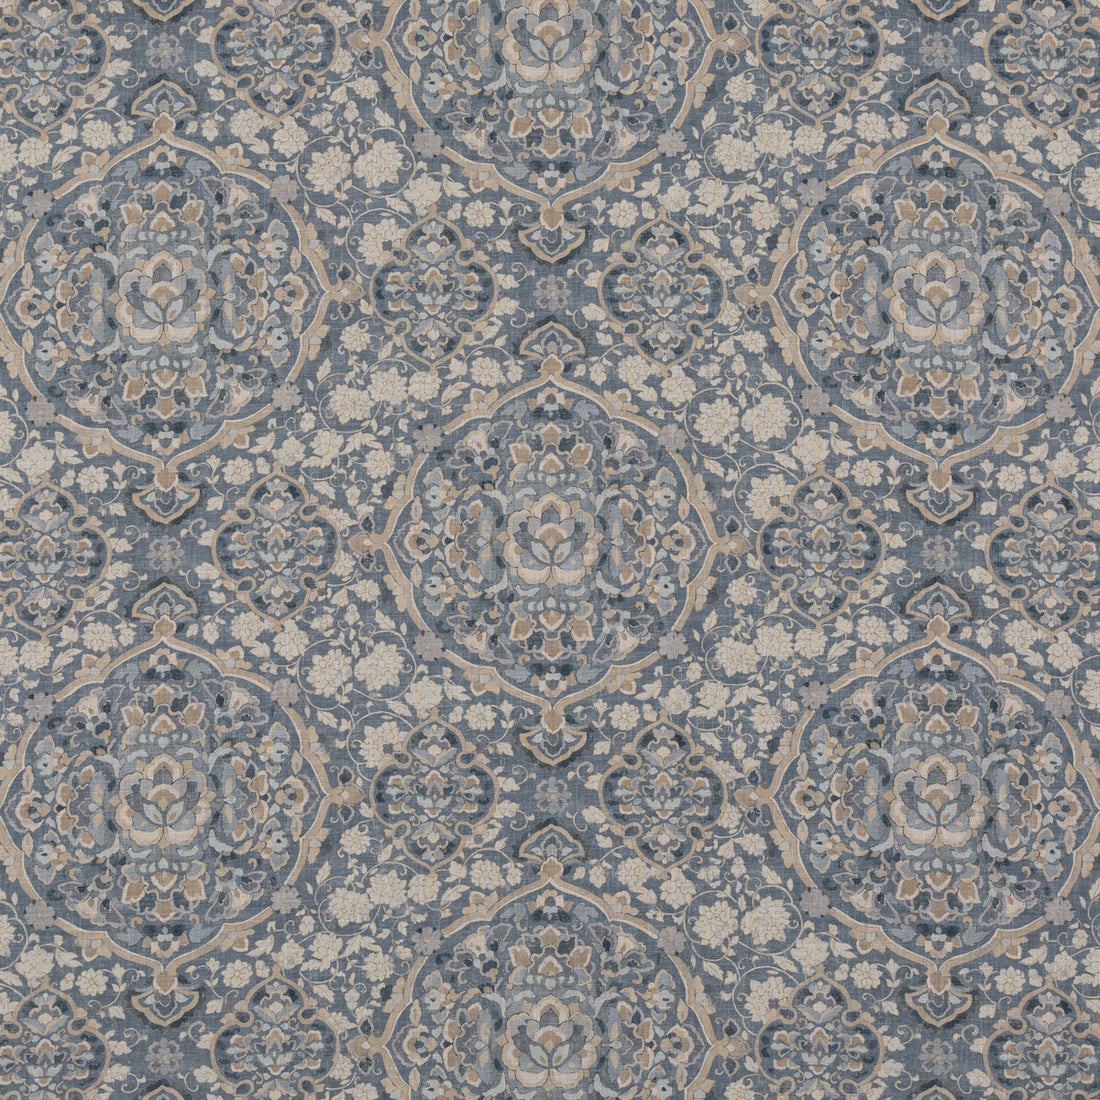 Kiana fabric in blue color - pattern BP10928.1.0 - by G P &amp; J Baker in the Caspian collection